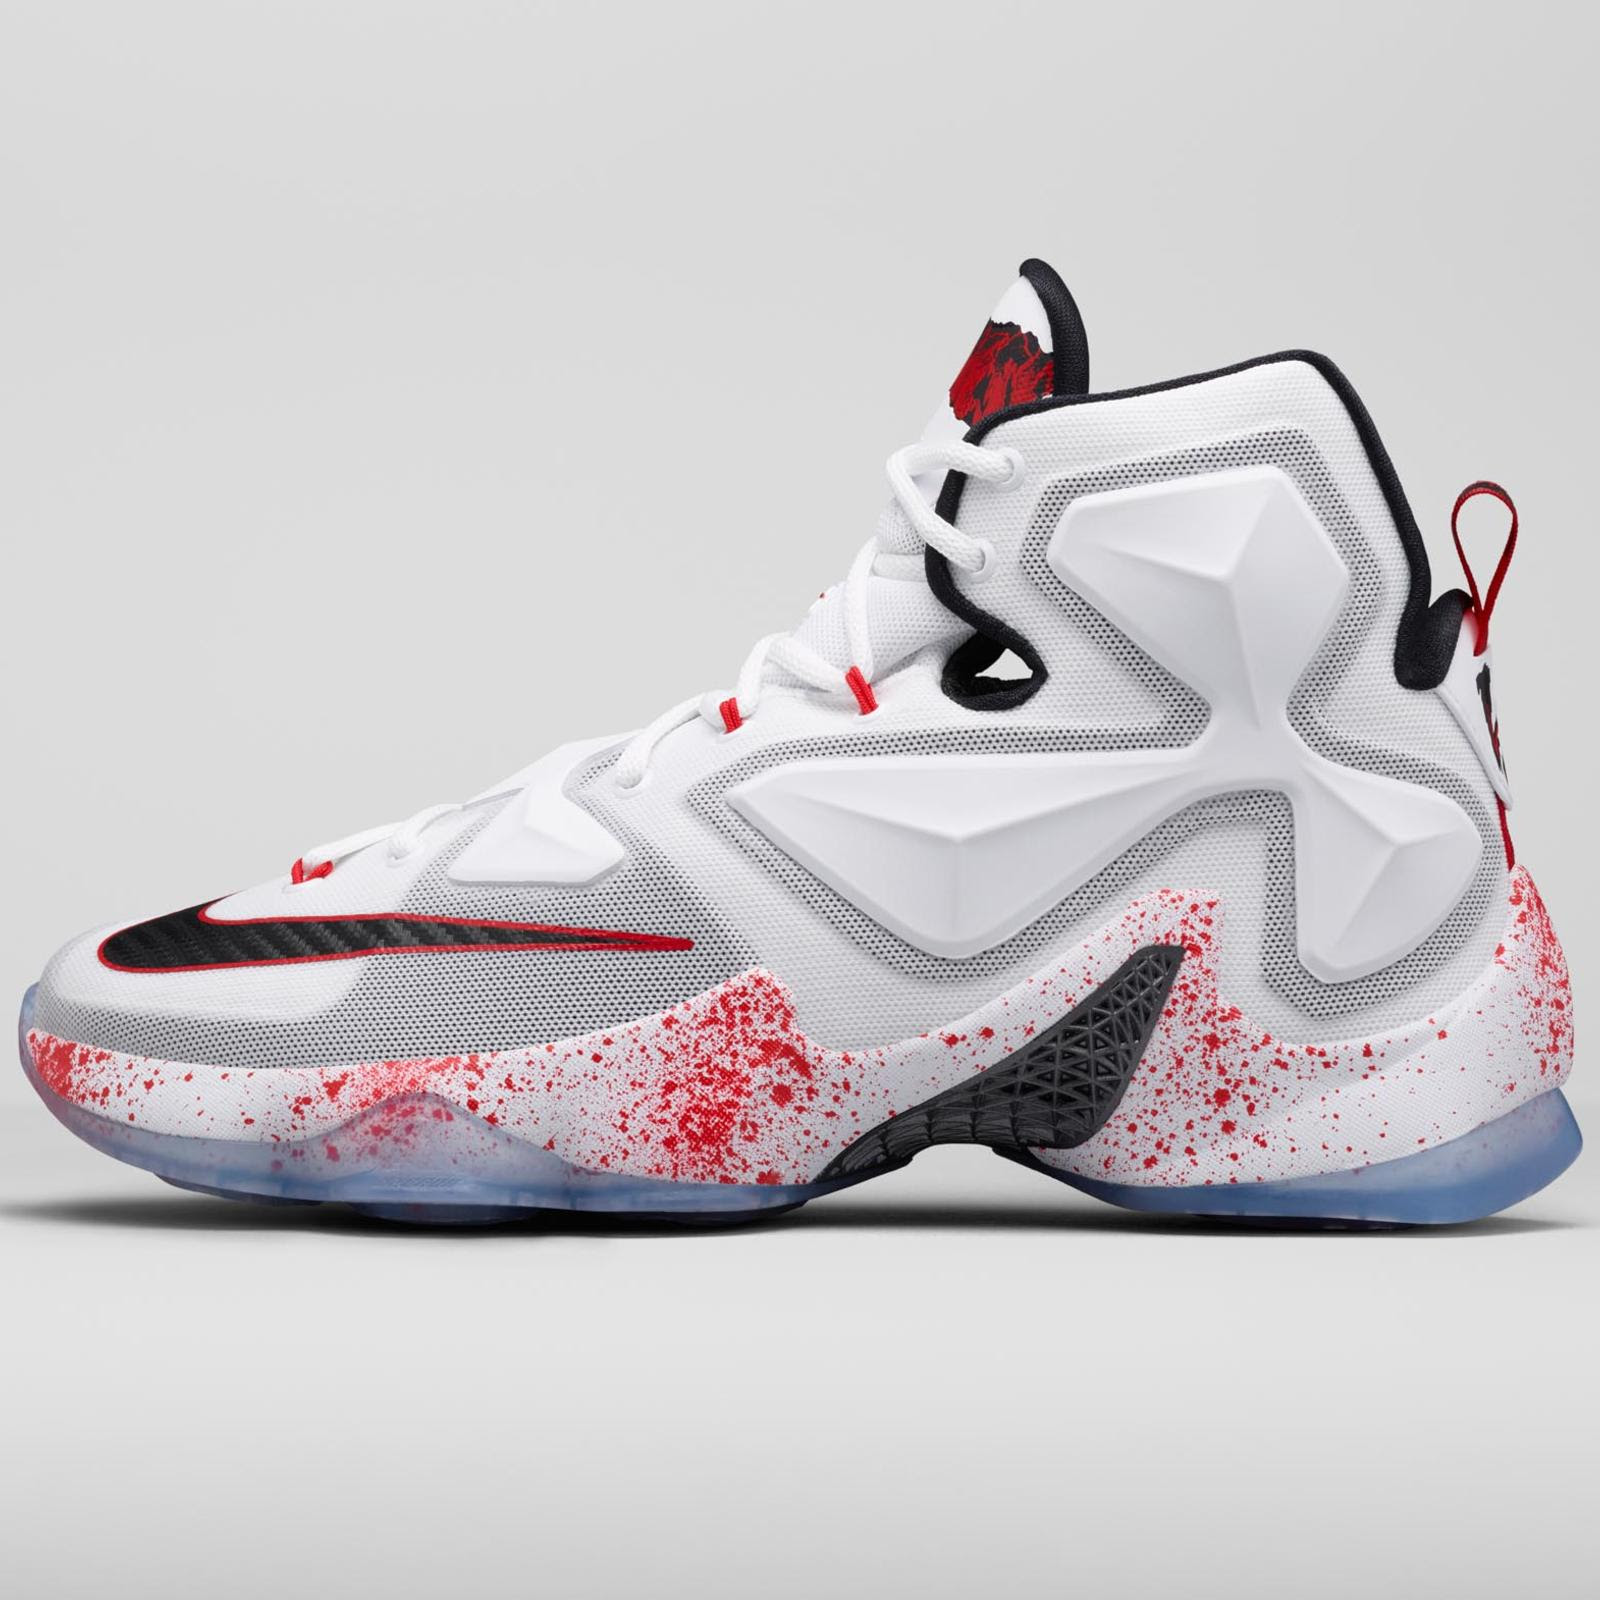 INTRODUCING THE LEBRON 13 HORROR FLICK SHOE